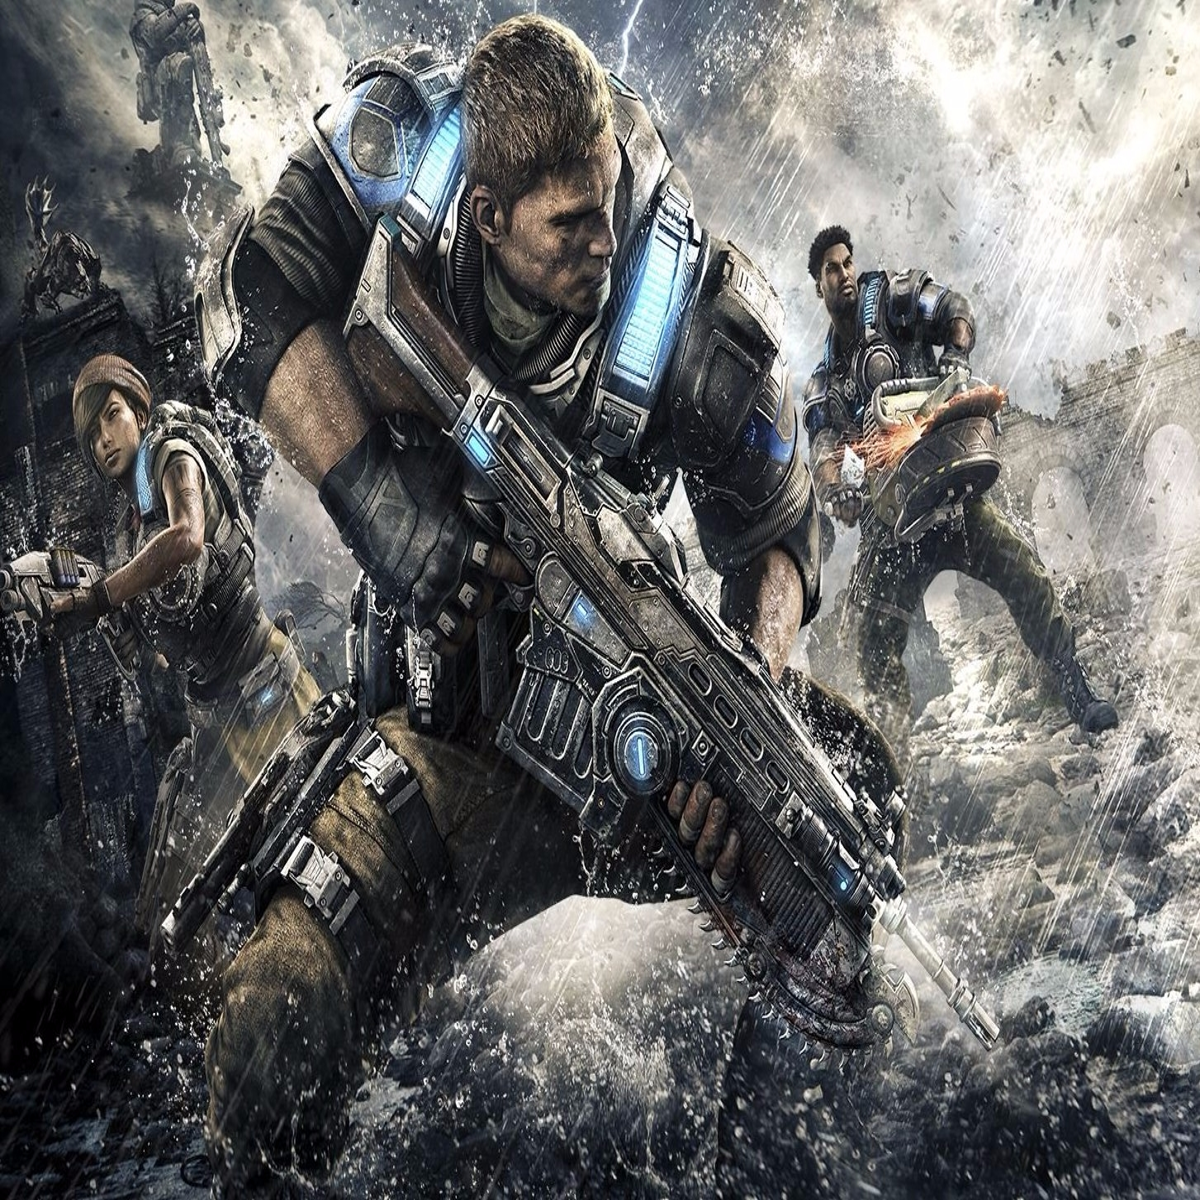 Gears of War 4 Launch Date Revealed. Possible PC Port on Release